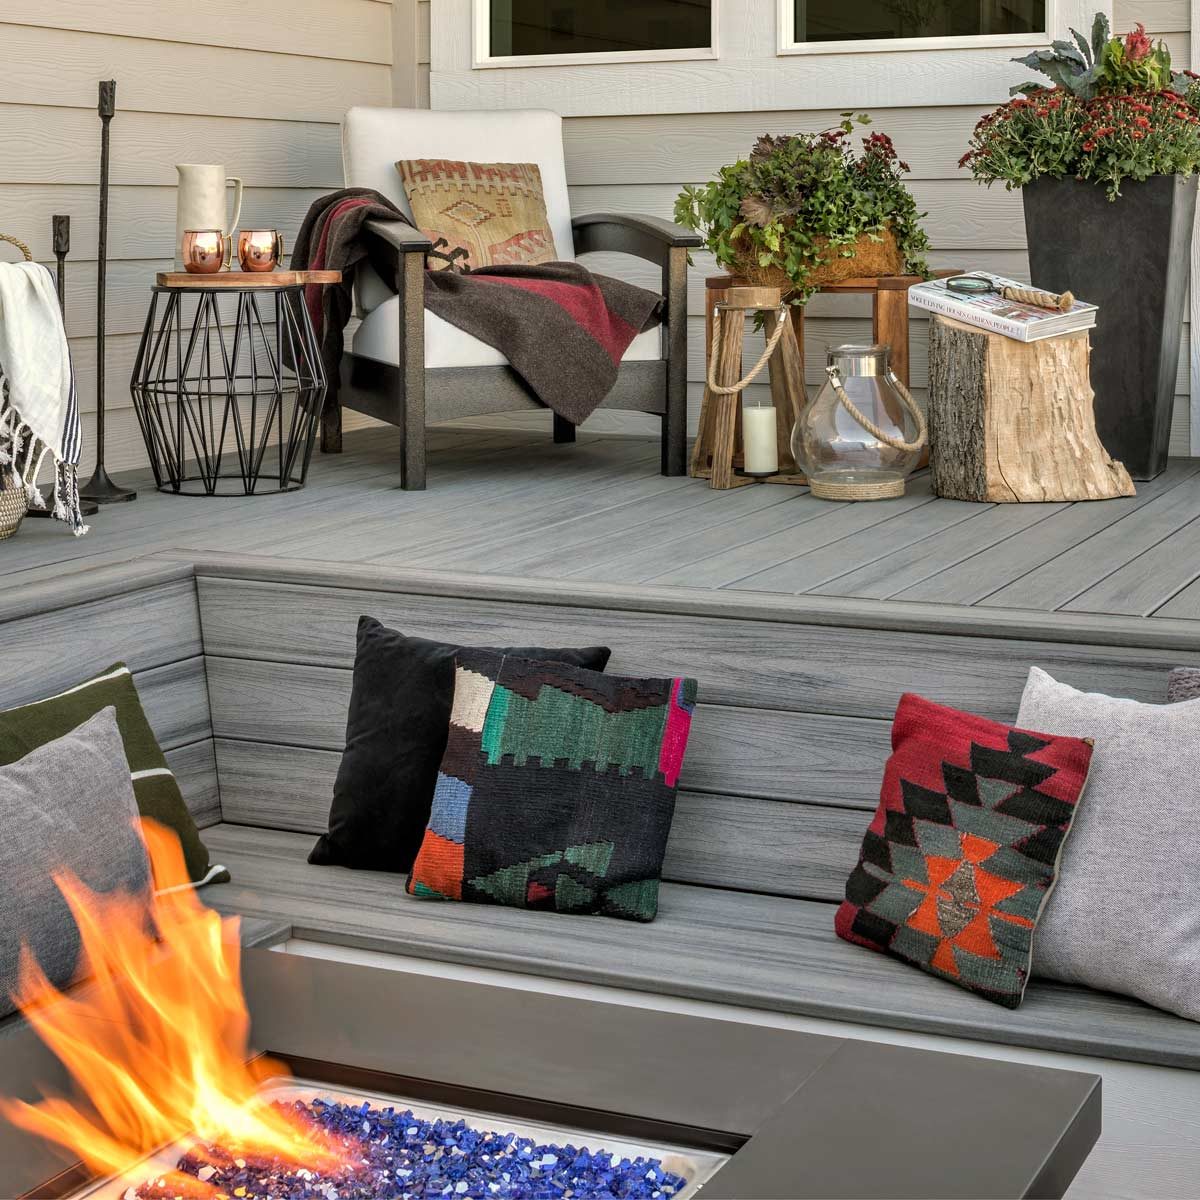 Trex Deck Ideas For Any Outdoor Space, Propane Fire Pit On Trex Deck